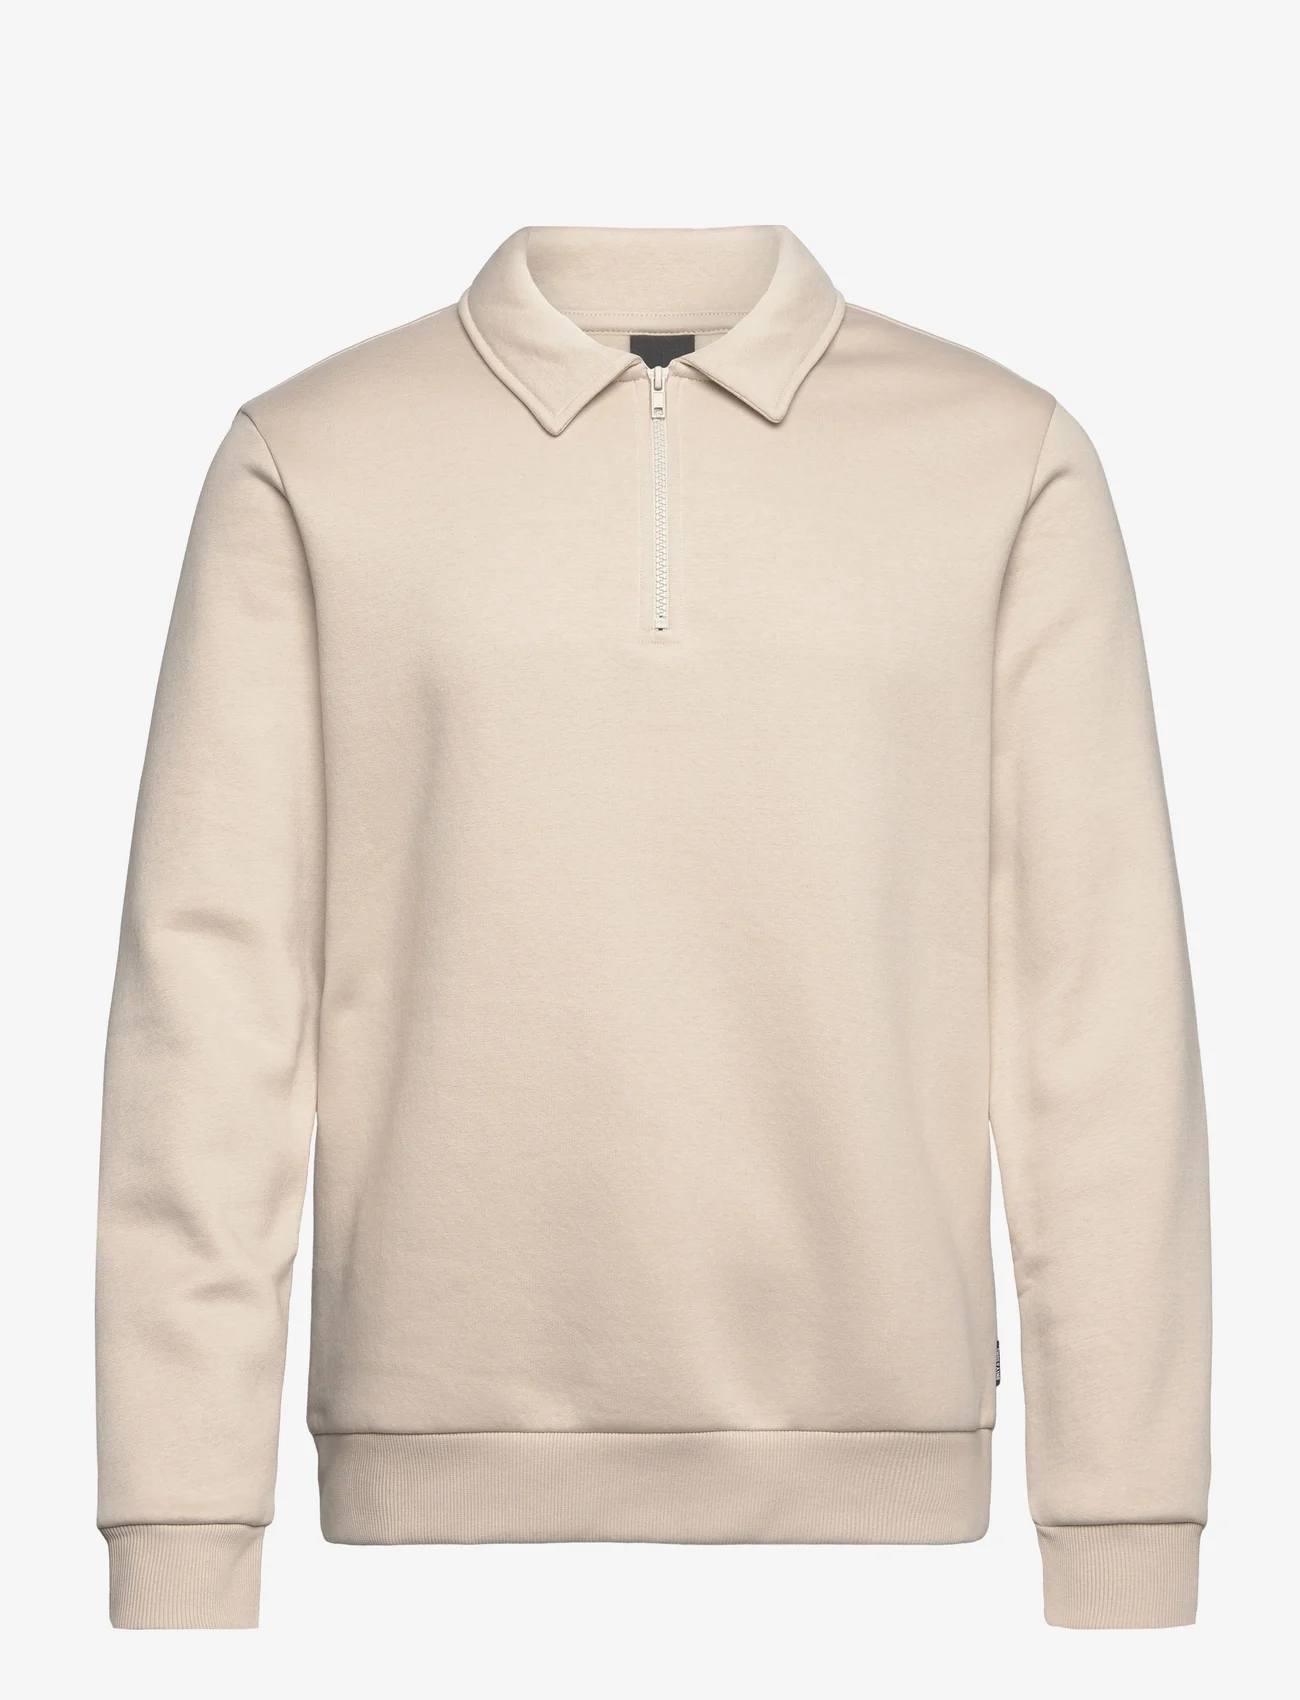 ONLY & SONS - ONSCERES 1/4 ZIP SWEAT POLO - sweatshirts - silver lining - 0